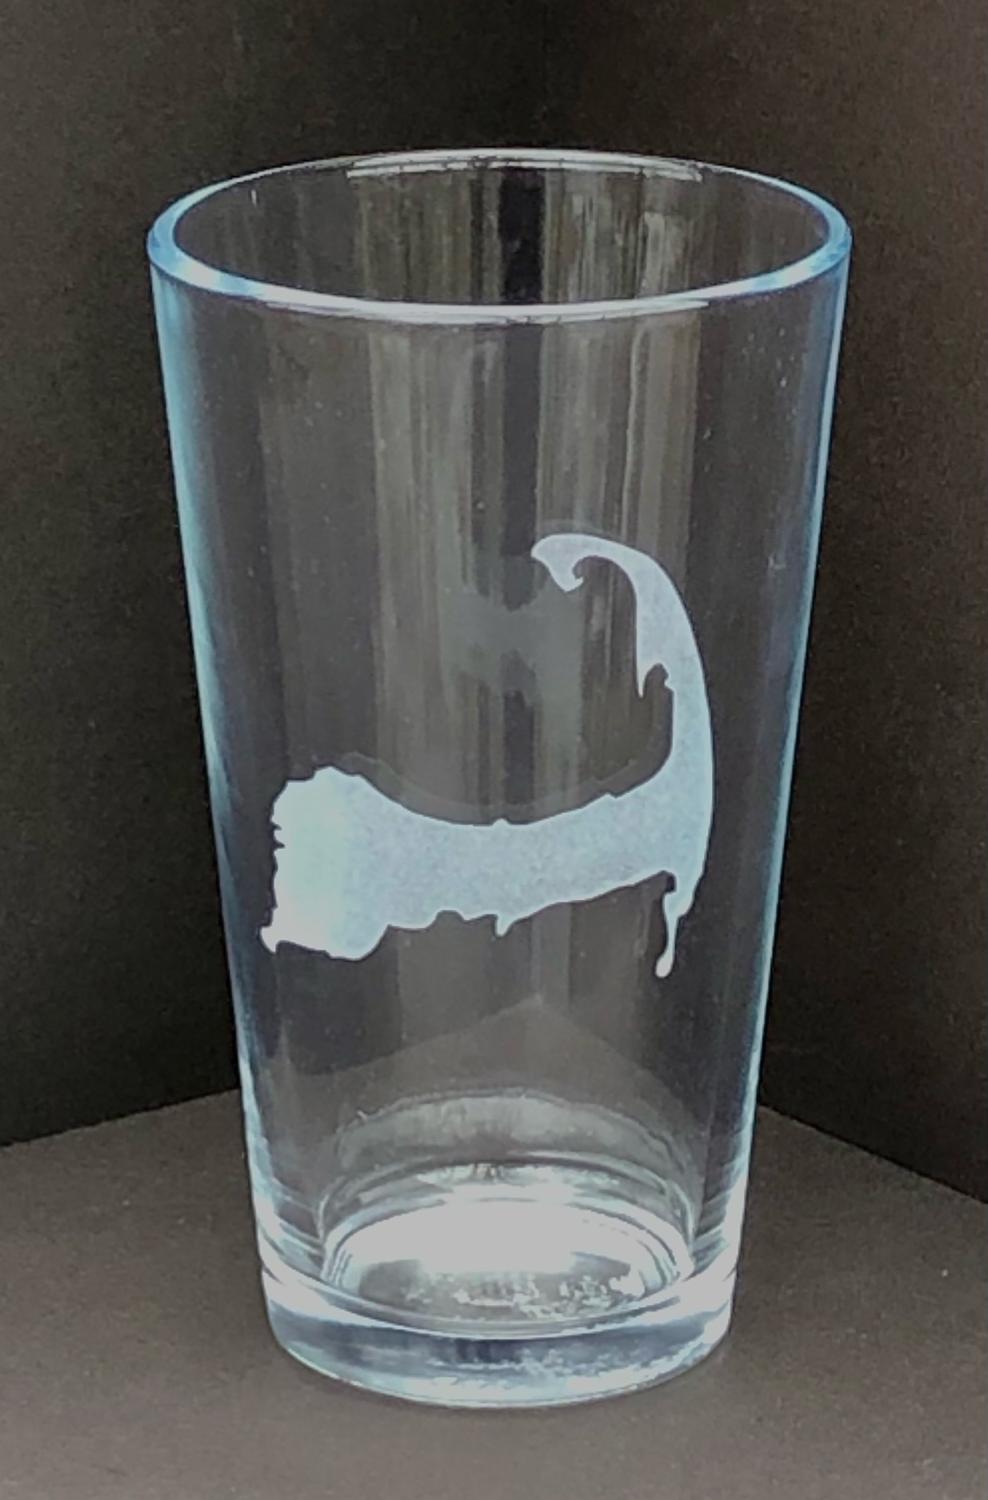 16 oz Can Shaped Glass - Cape Cod Beer